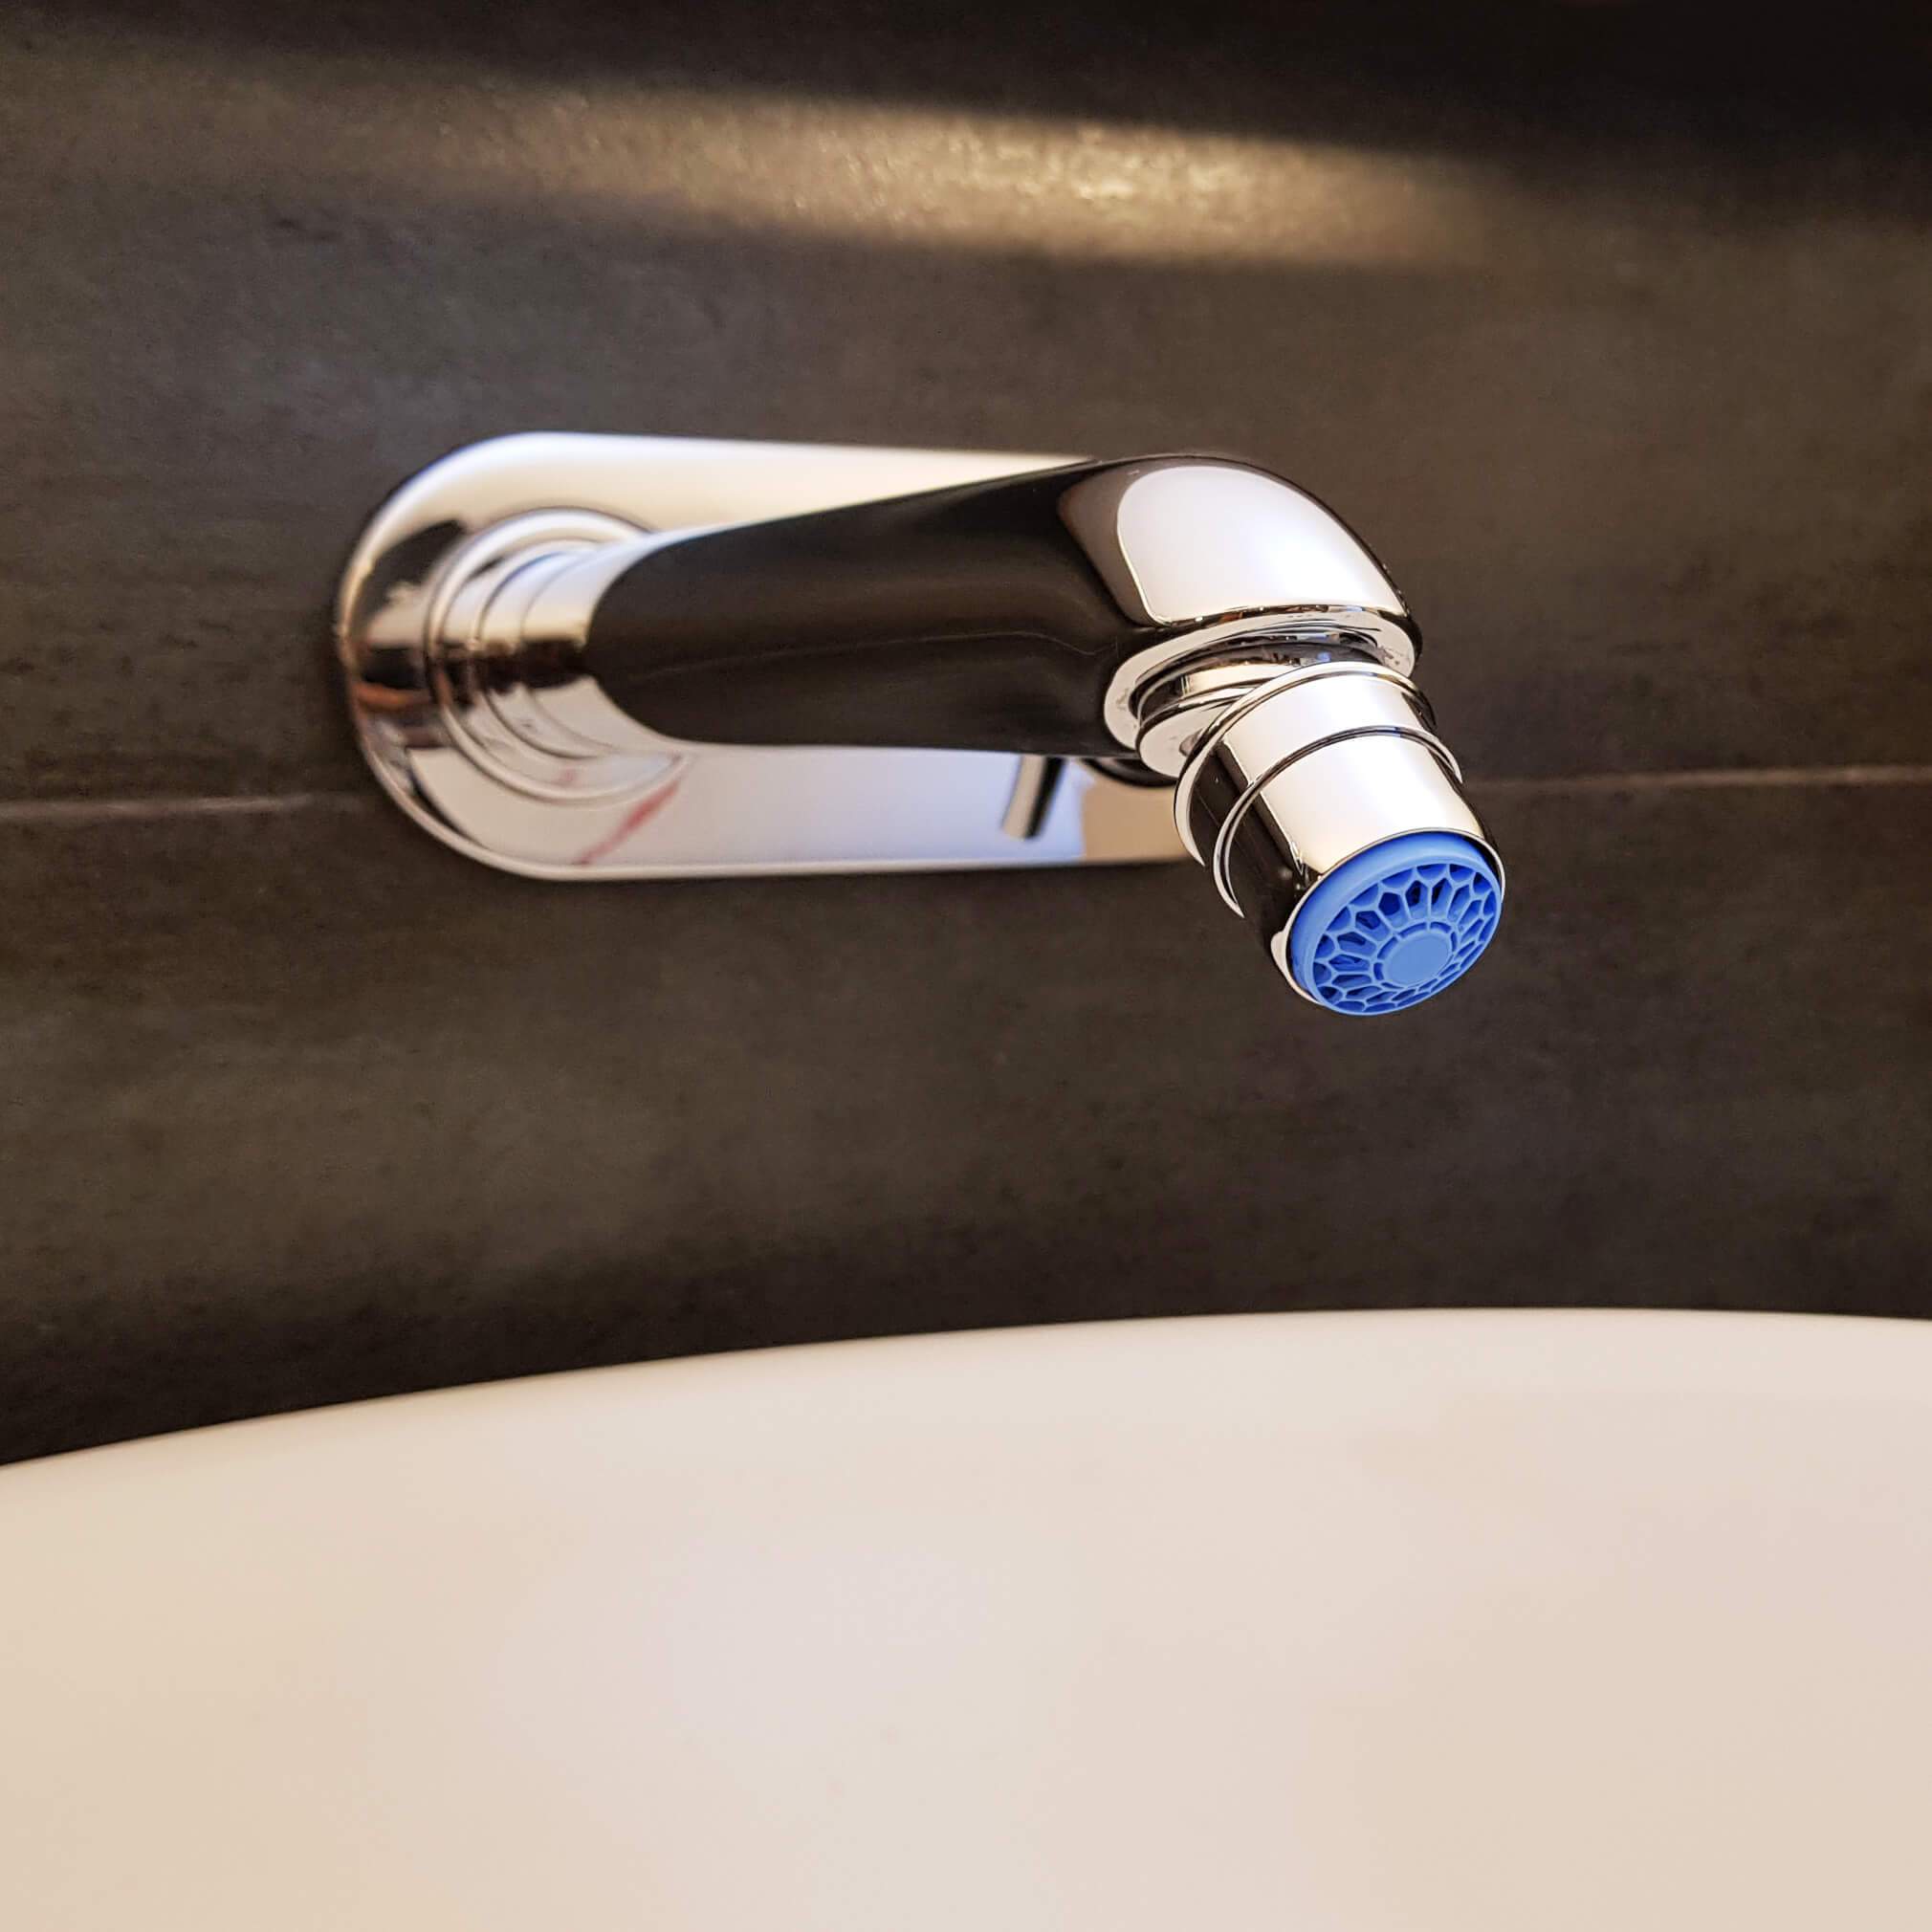 One Touch Faucet Extender - Plus